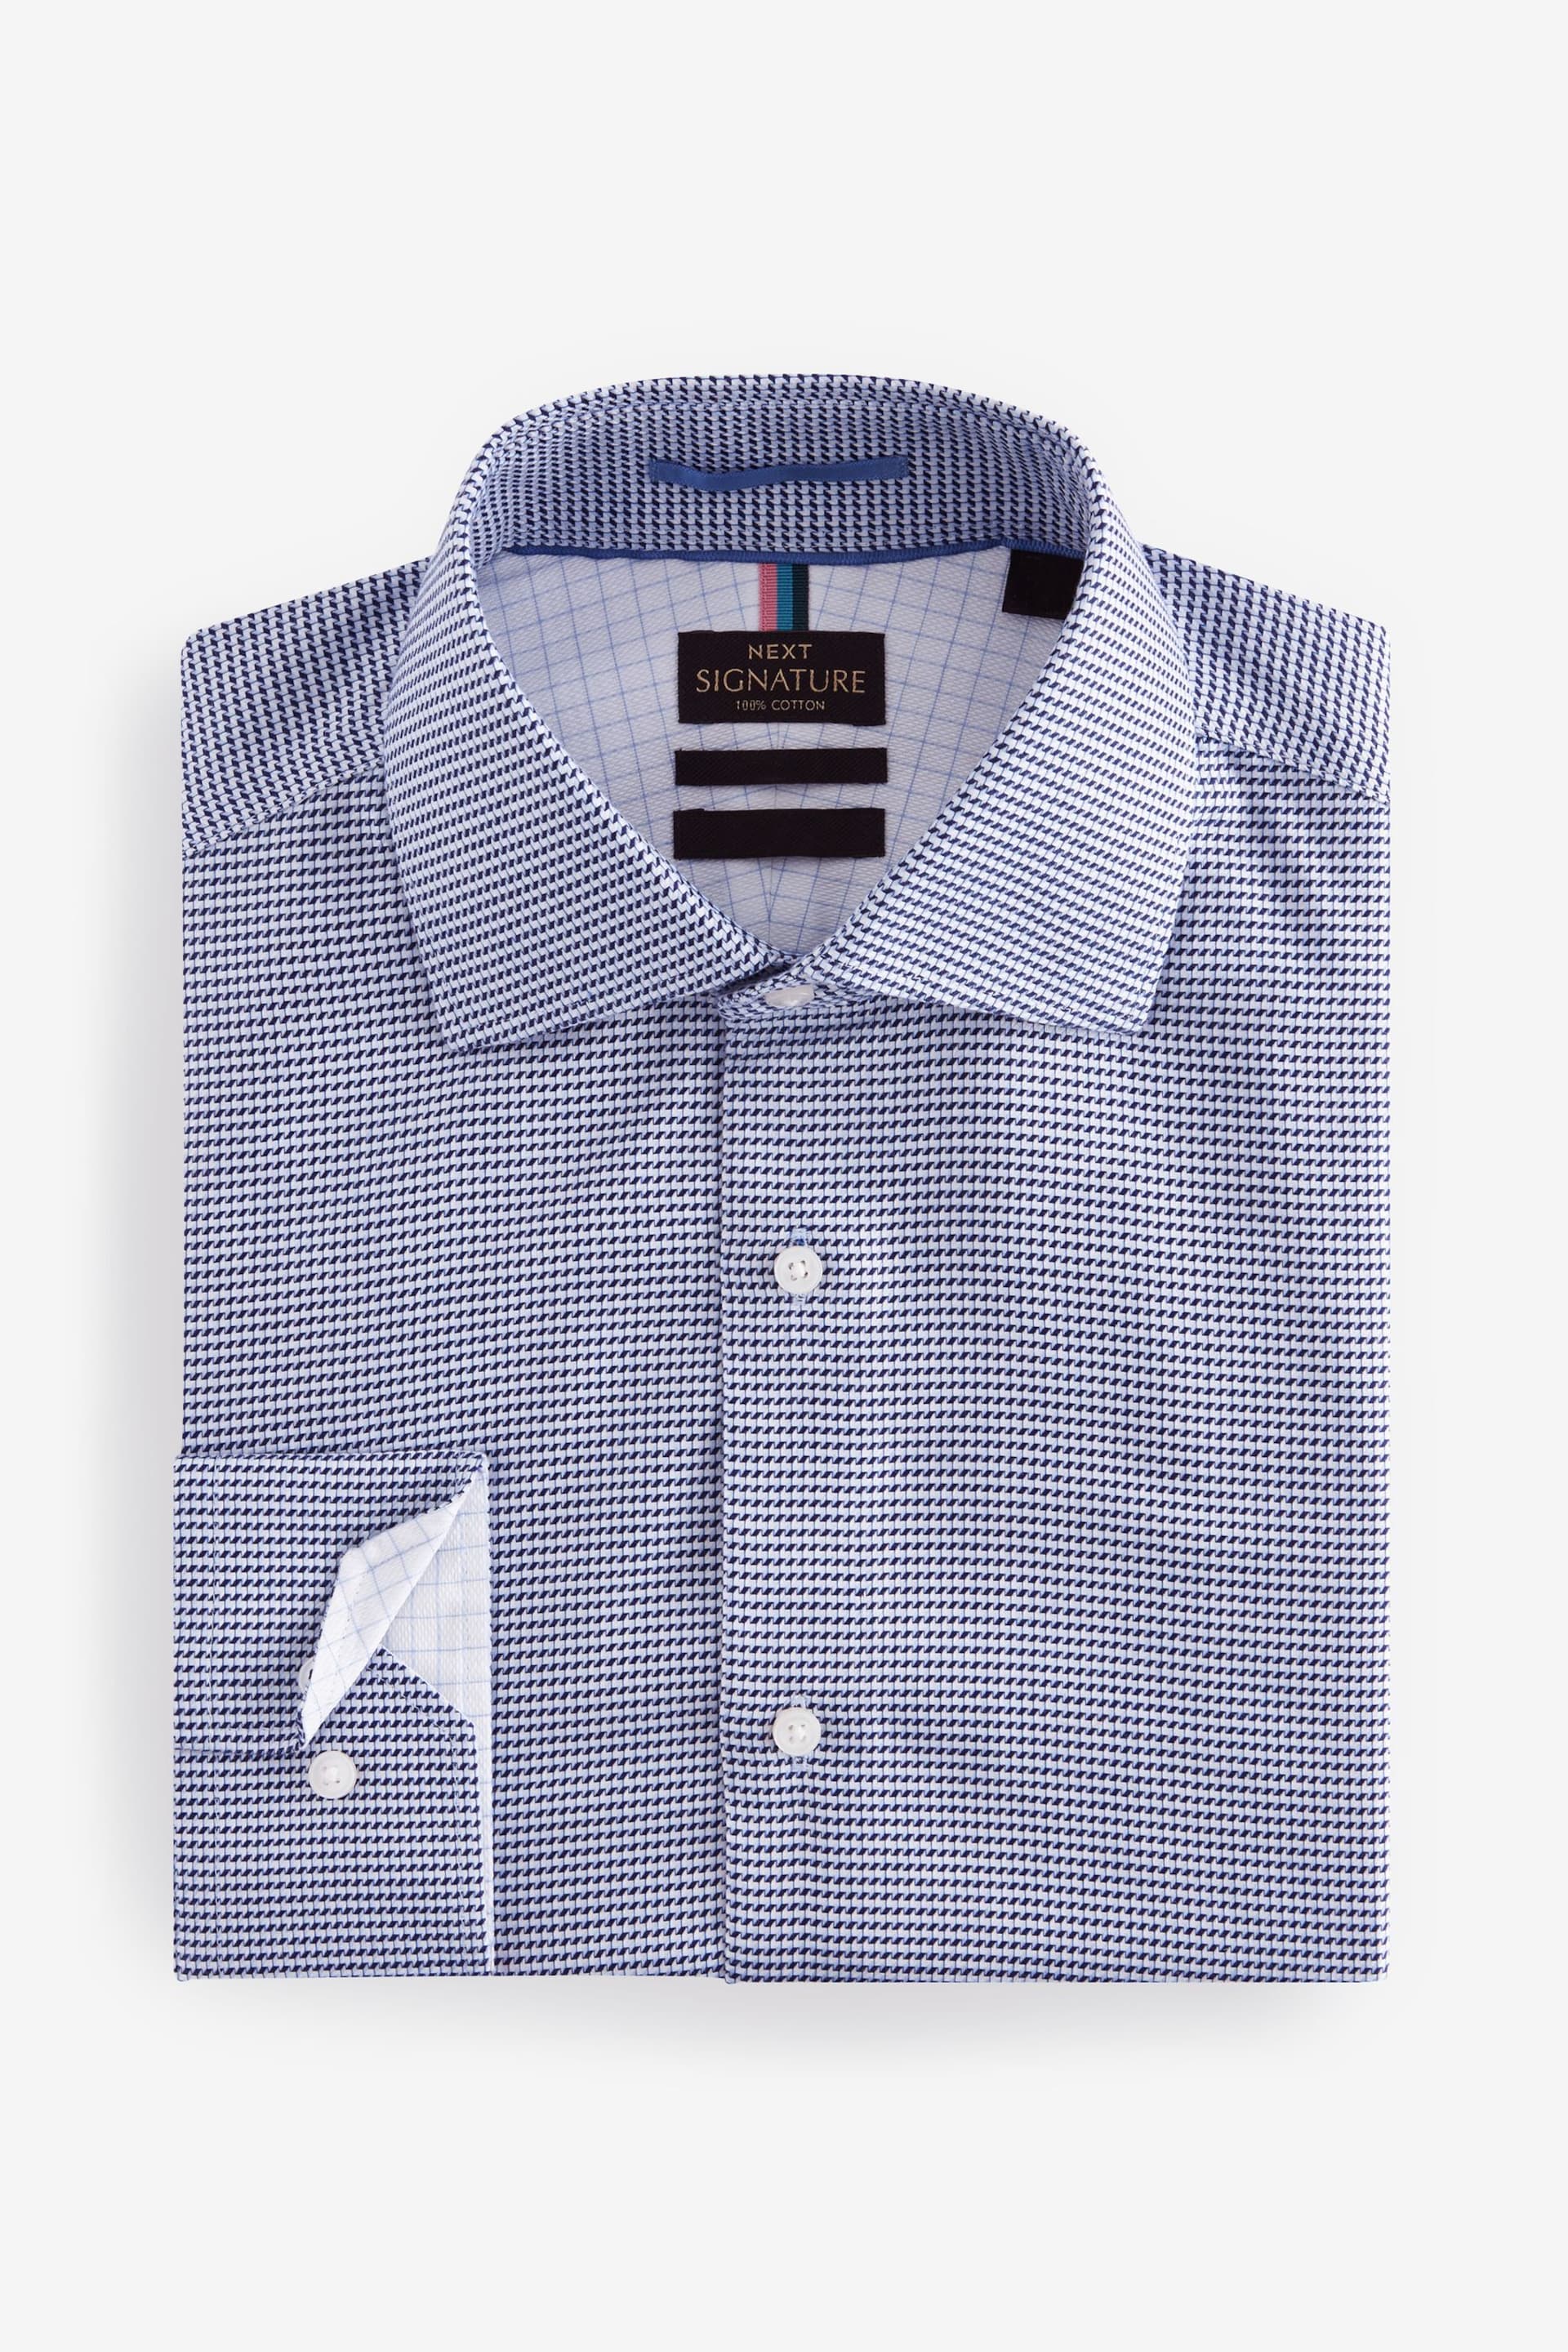 Navy Blue/White Textured Slim Fit Signature Super Non Iron Single Cuff Shirt with Cutaway Collar - Image 6 of 8